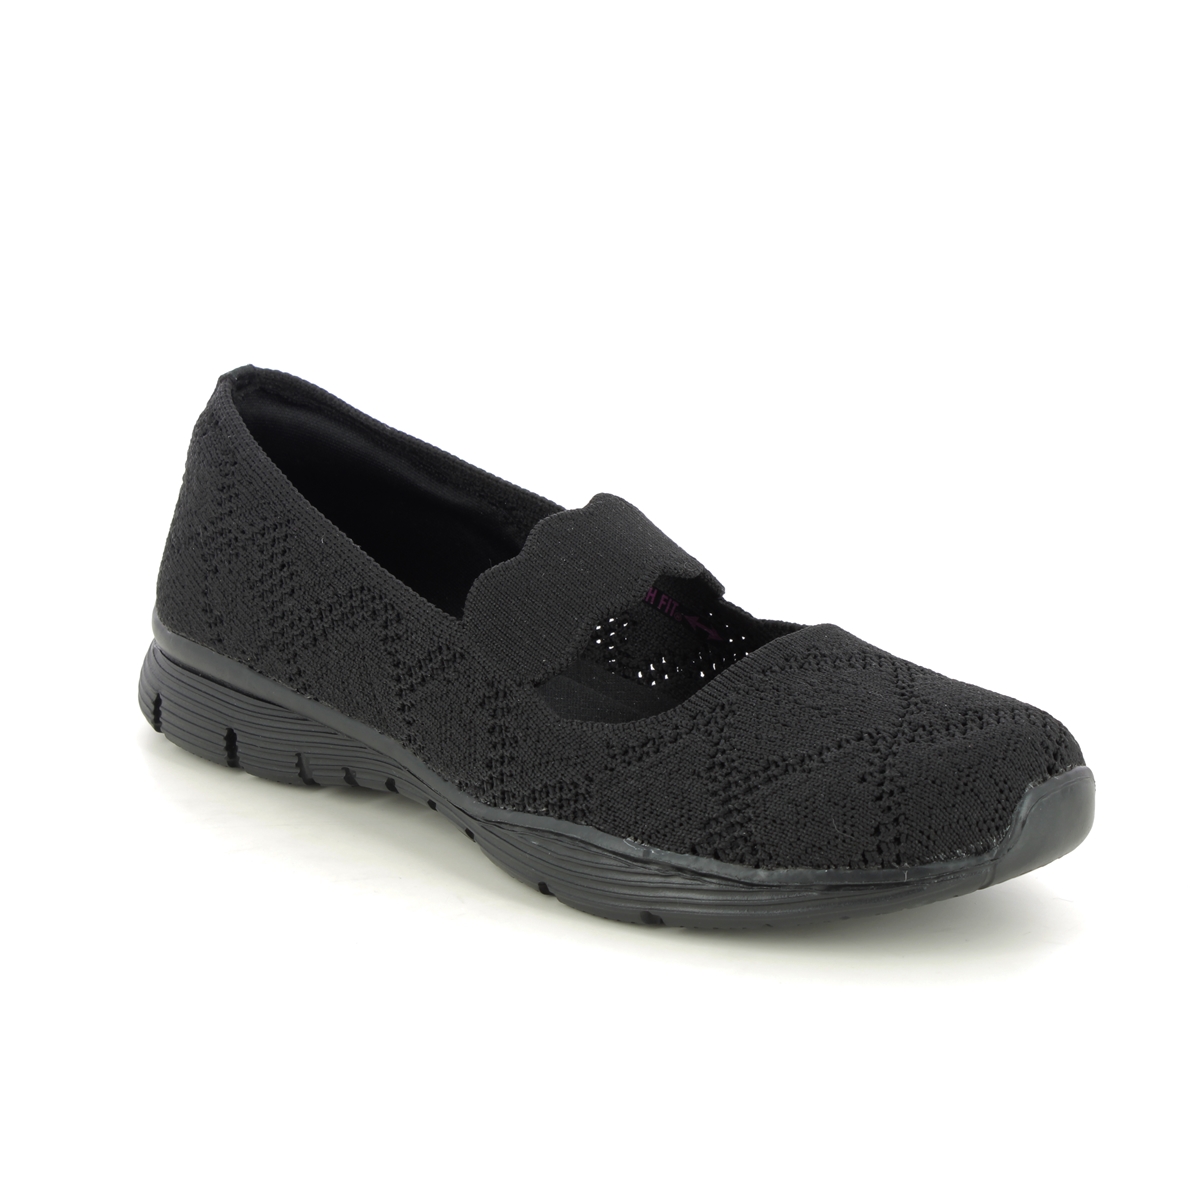 Skechers Seager Pitch 2 BBK Black Womens Mary Jane Shoes 158110 in a Plain Textile in Size 7